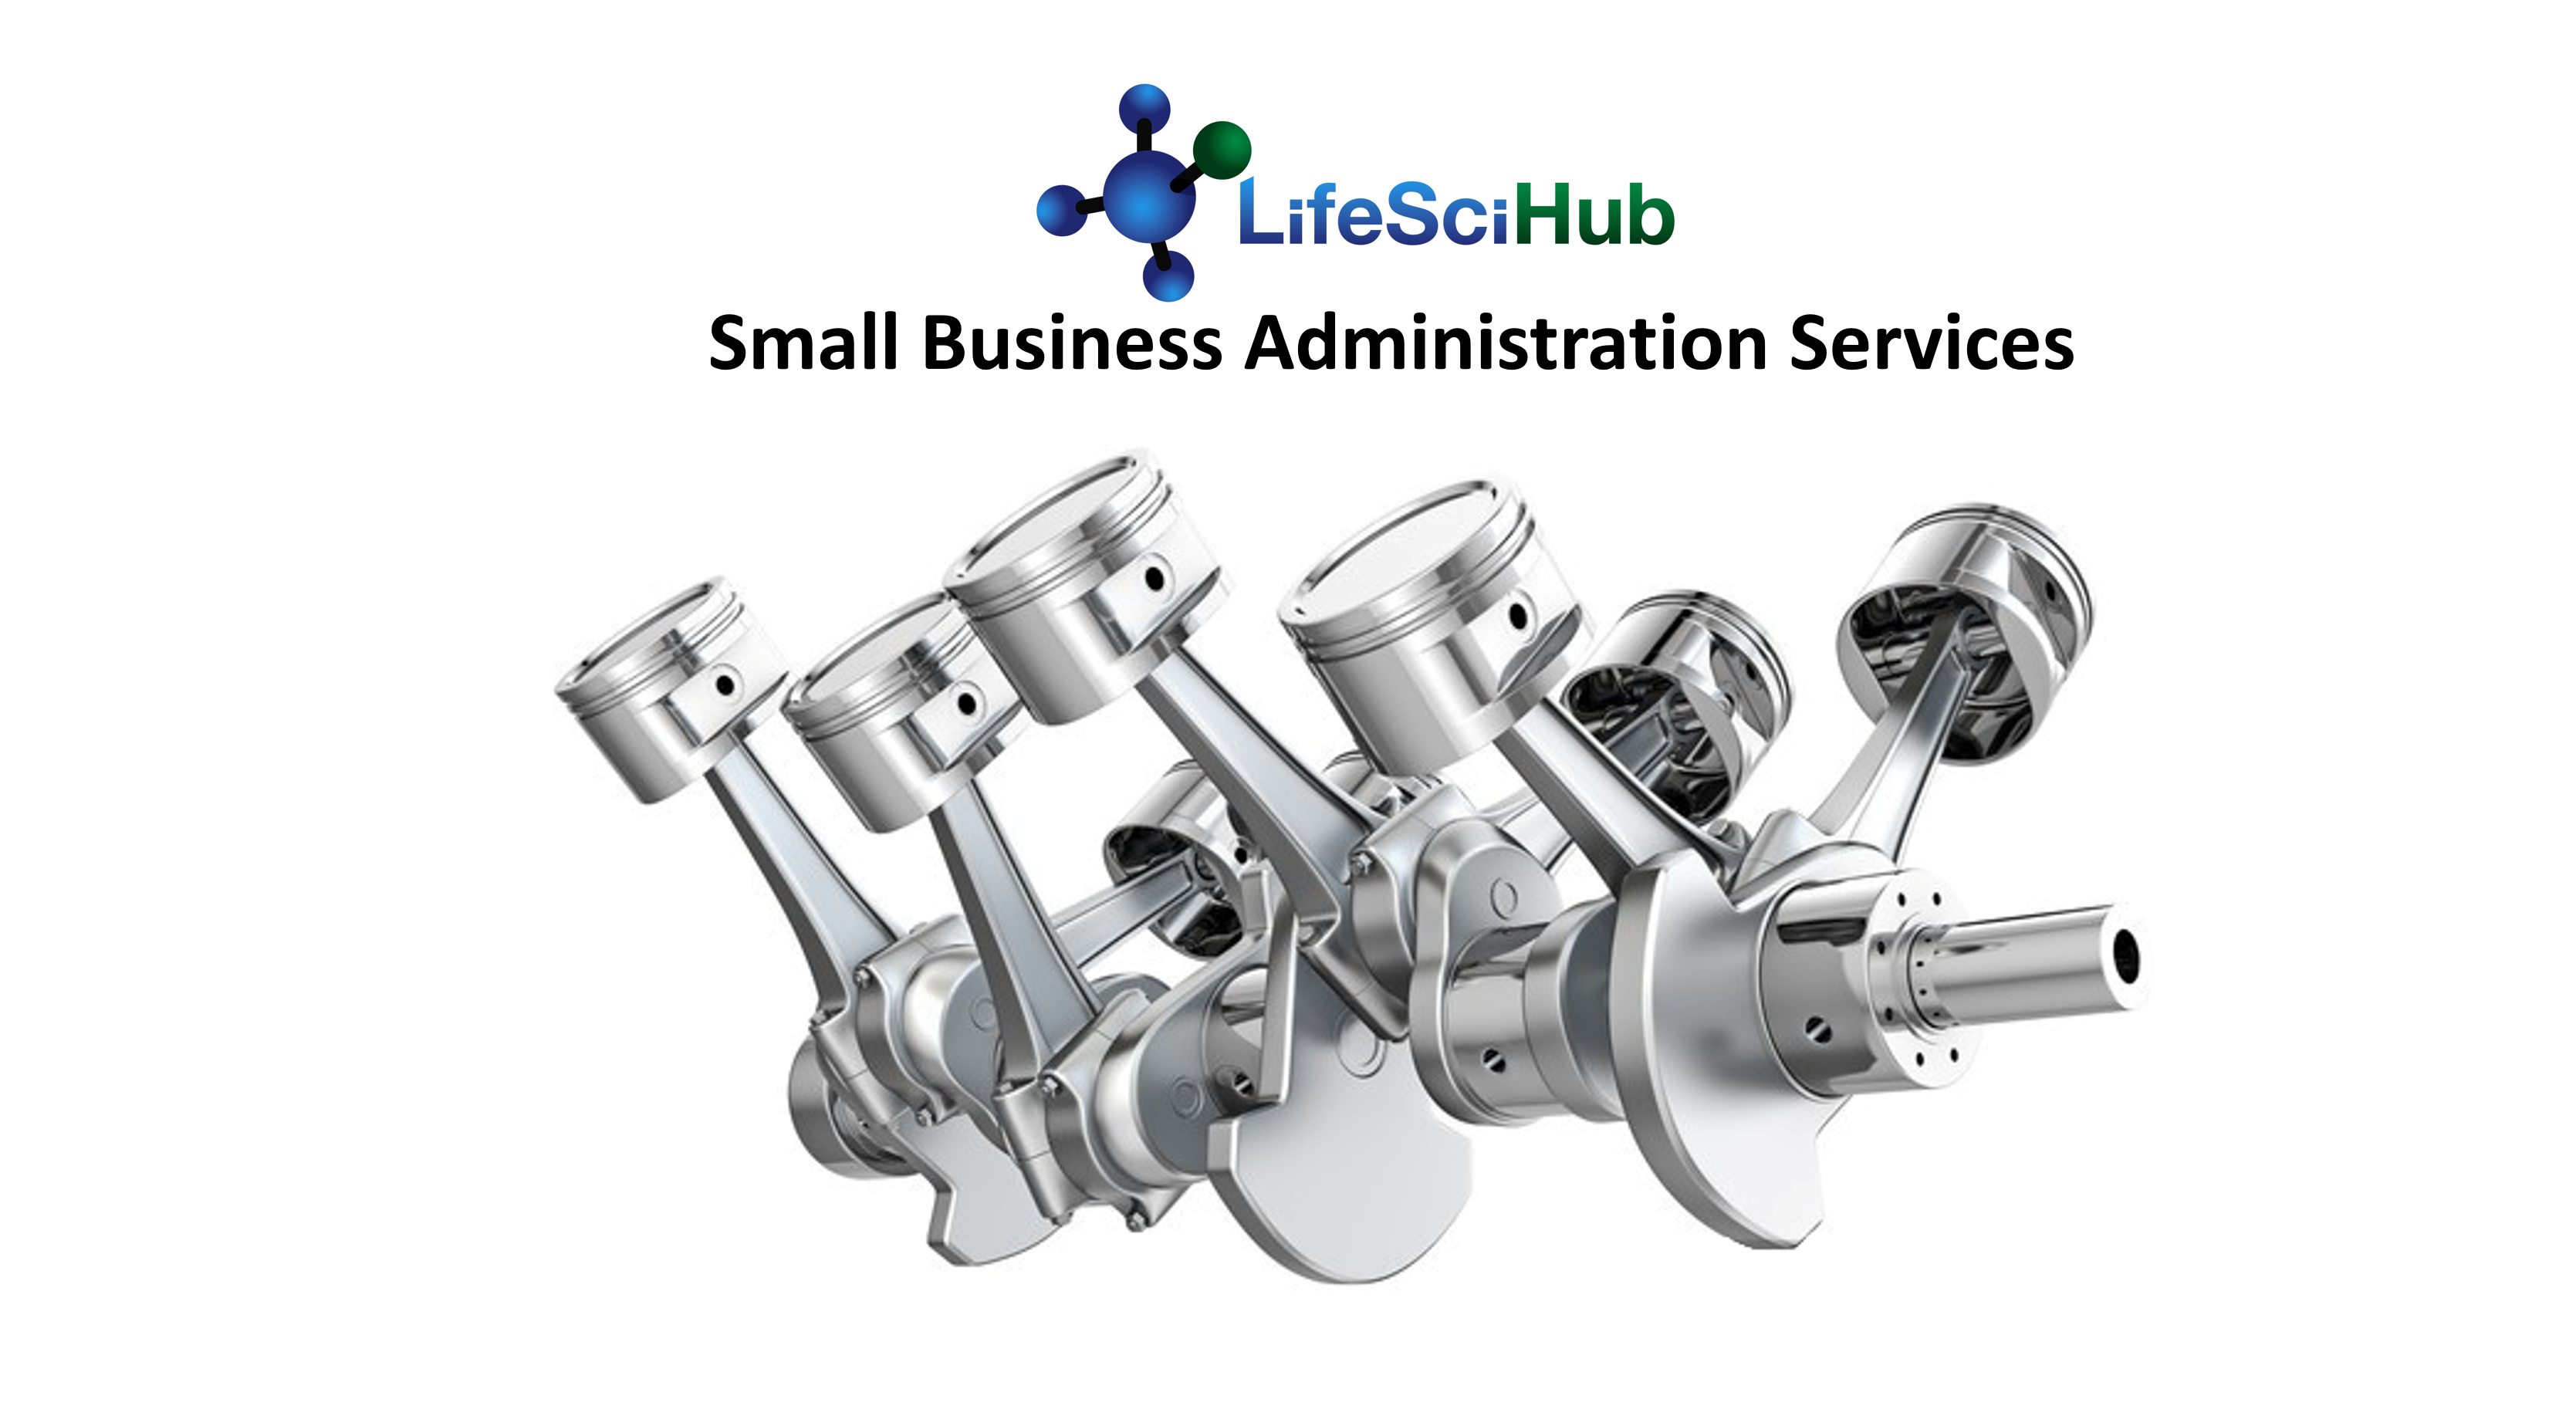 LifeSciHub Small Business Administration Services